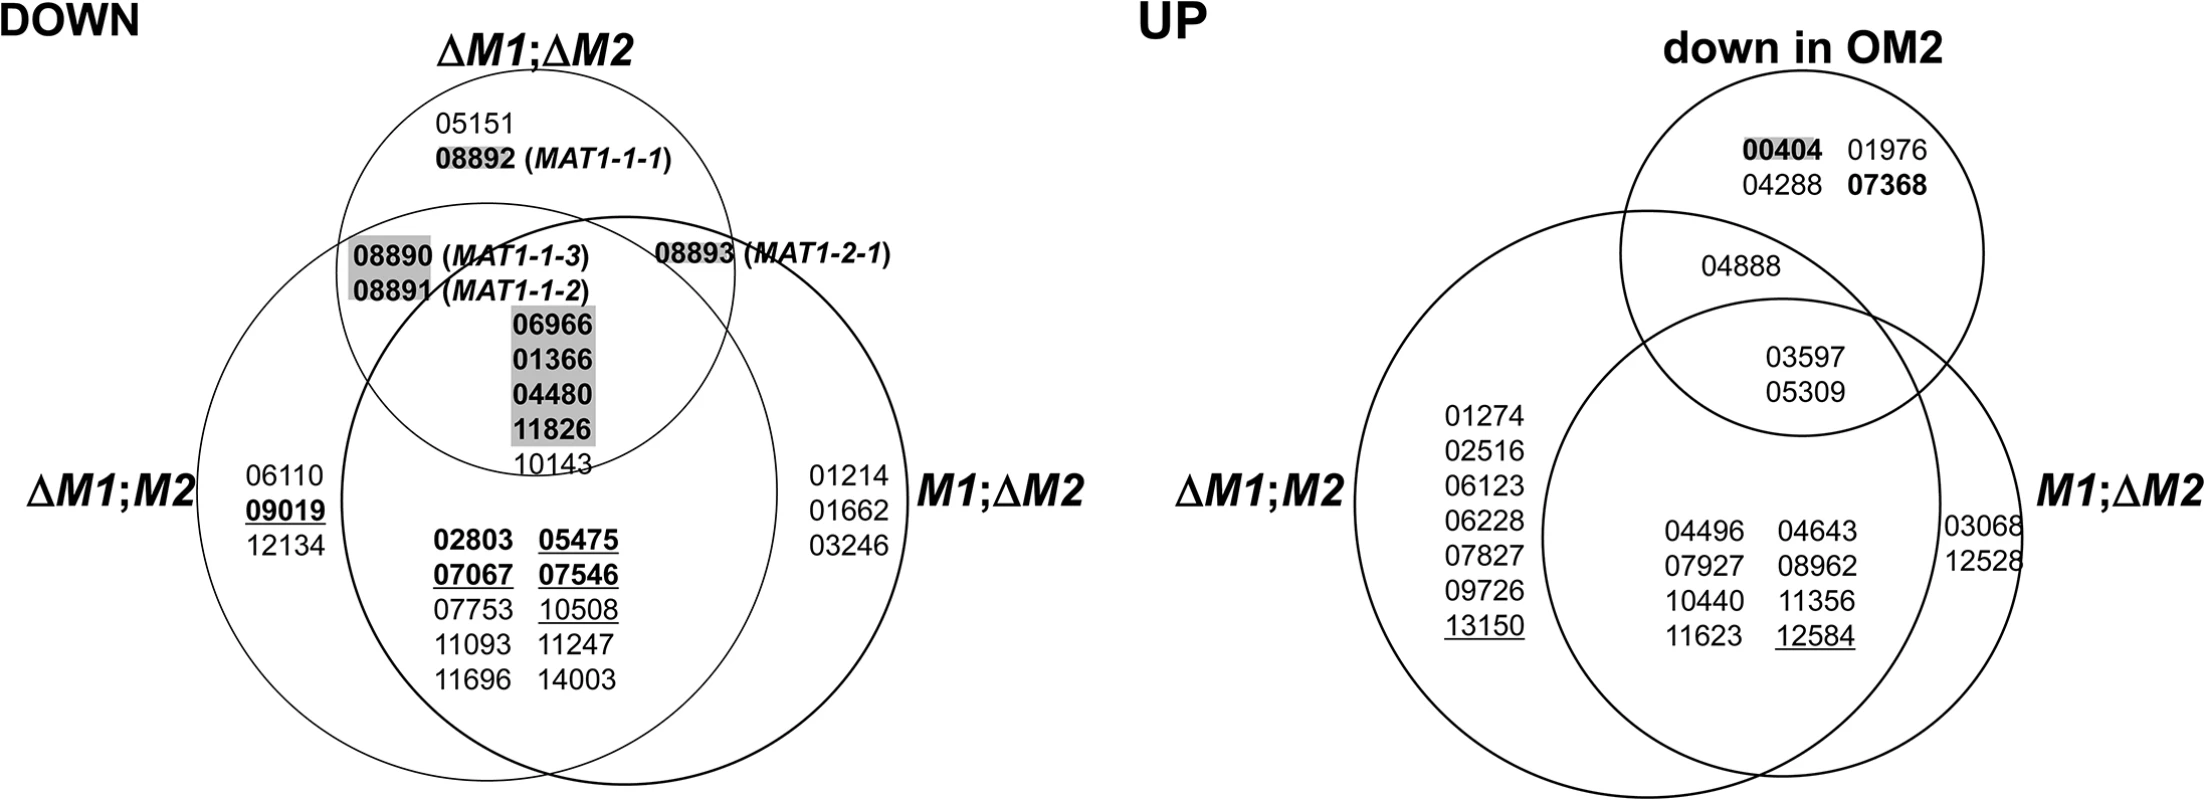 Genes encoding the transcription factors differentially expressed in the <i>F</i>. <i>graminearum</i> strains deleted for the <i>MAT1-1</i> locus (Δ<i>M1</i>;<i>M2</i>), <i>MAT1-2</i> locus (<i>M1</i>;Δ<i>M2</i>), both <i>MAT1-1</i> and <i>MAT1-2</i> loci (Δ<i>M1</i>;Δ<i>M2</i>), and overexpressing <i>MAT1-2-1</i> (OM2).